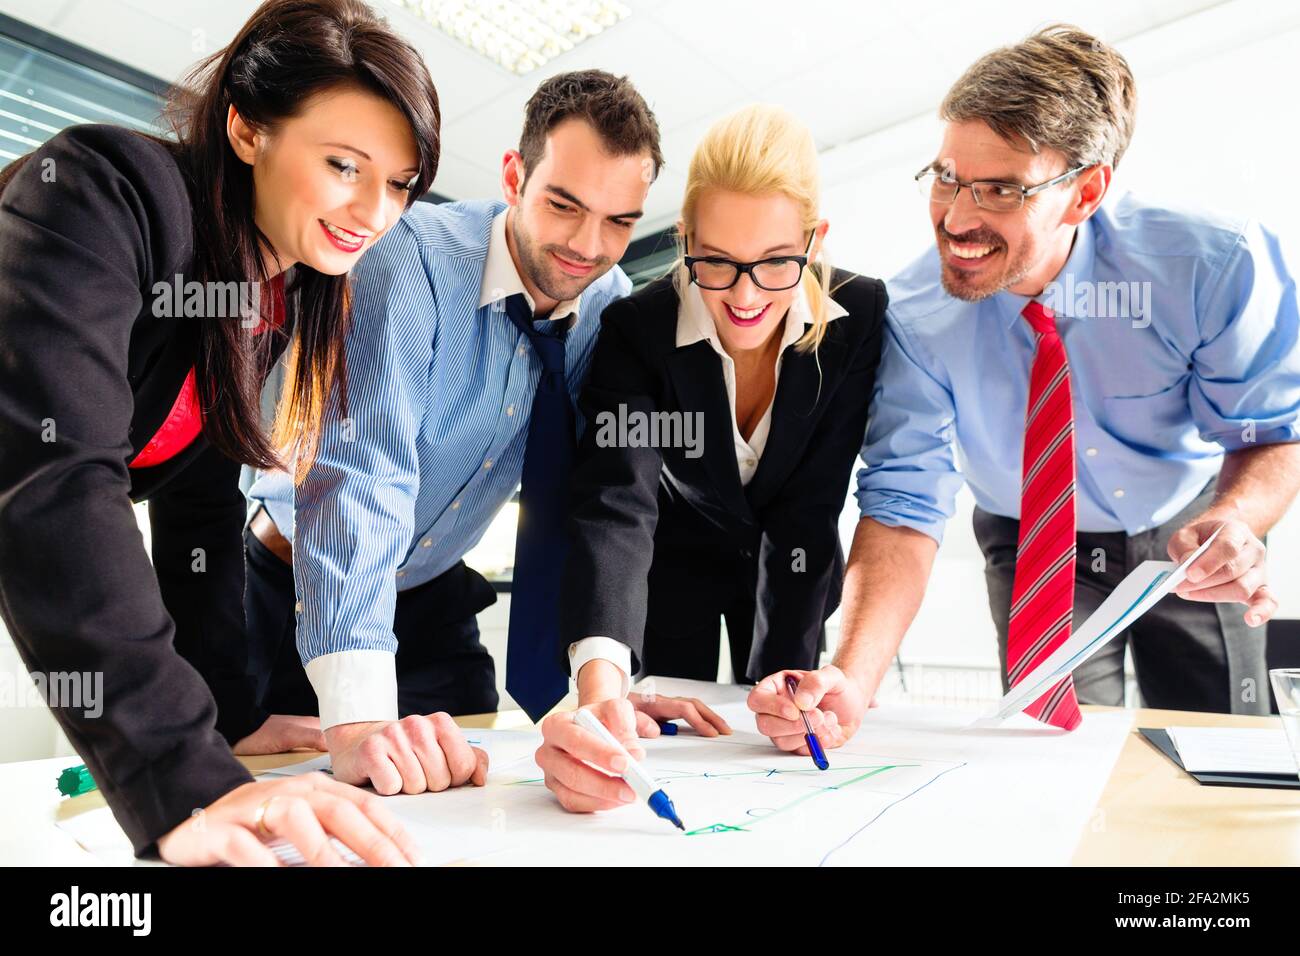 Four professionals in office in business attire having strategy meeting to determine the future of company Stock Photo